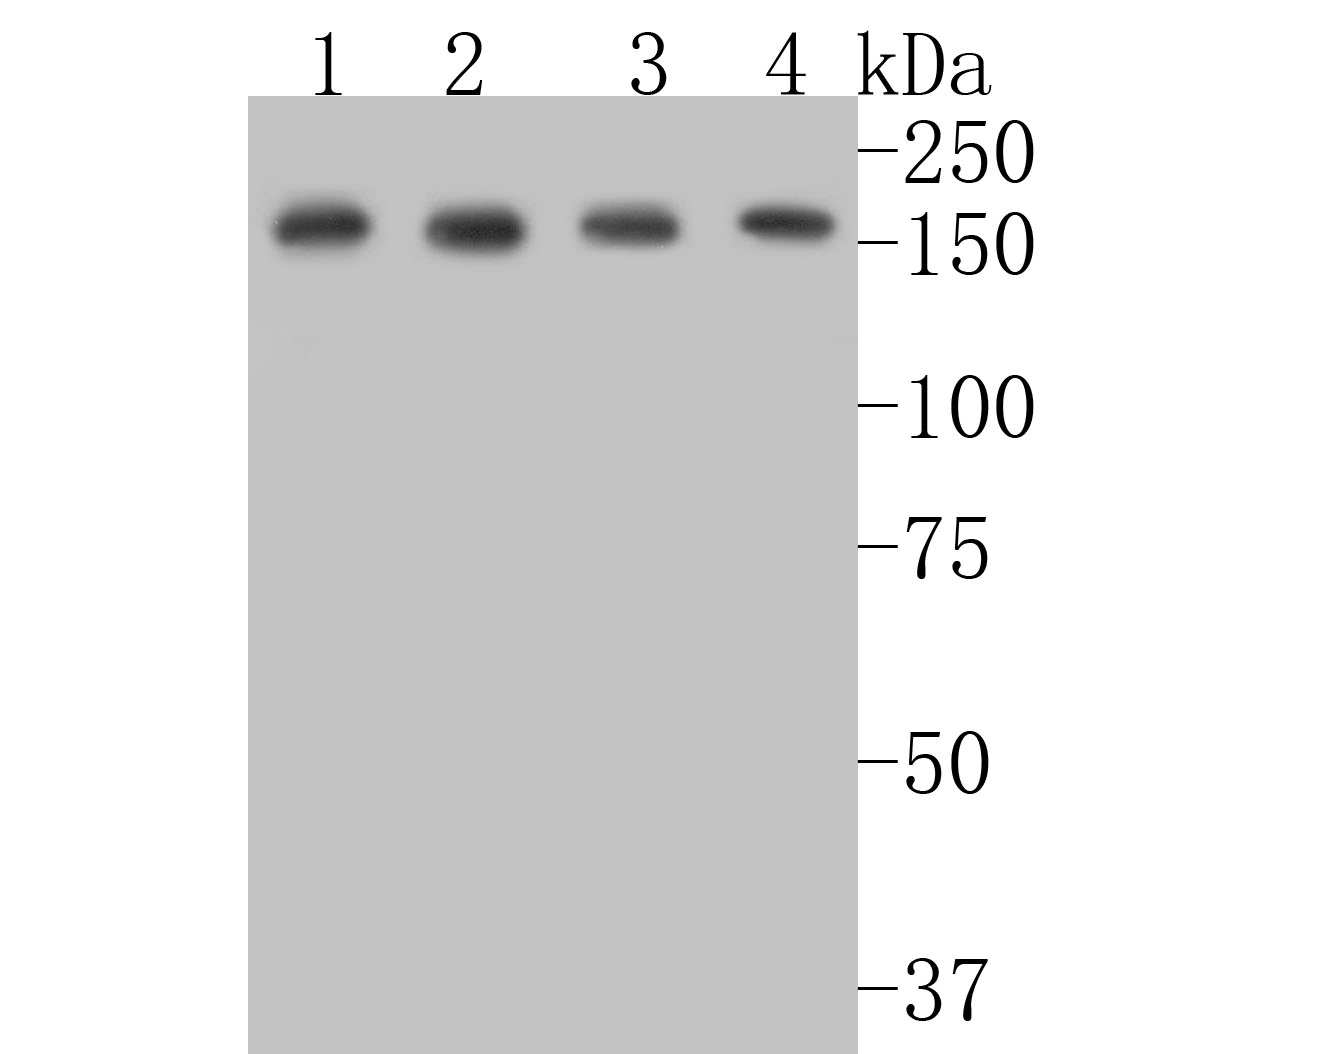 "Western blot analysis of BAT3 on different lysates. Proteins were transferred to a PVDF membrane and blocked with 5% BSA in PBS for 1 hour at room temperature. The primary antibody (ET7110-88, 1/500) was used in 5% BSA at room temperature for 2 hours. Goat Anti-Rabbit IgG - HRP Secondary Antibody (HA1001) at 1:5,000 dilution was used for 1 hour at room temperature.<br />
Positive control: <br />
Lane 1: Rat testis tissue lysate<br />
Lane 2: 293 cell lysate<br />
Lane 3: HepG2 cell lysate<br />
Lane 4: Rat brain tissue lysate